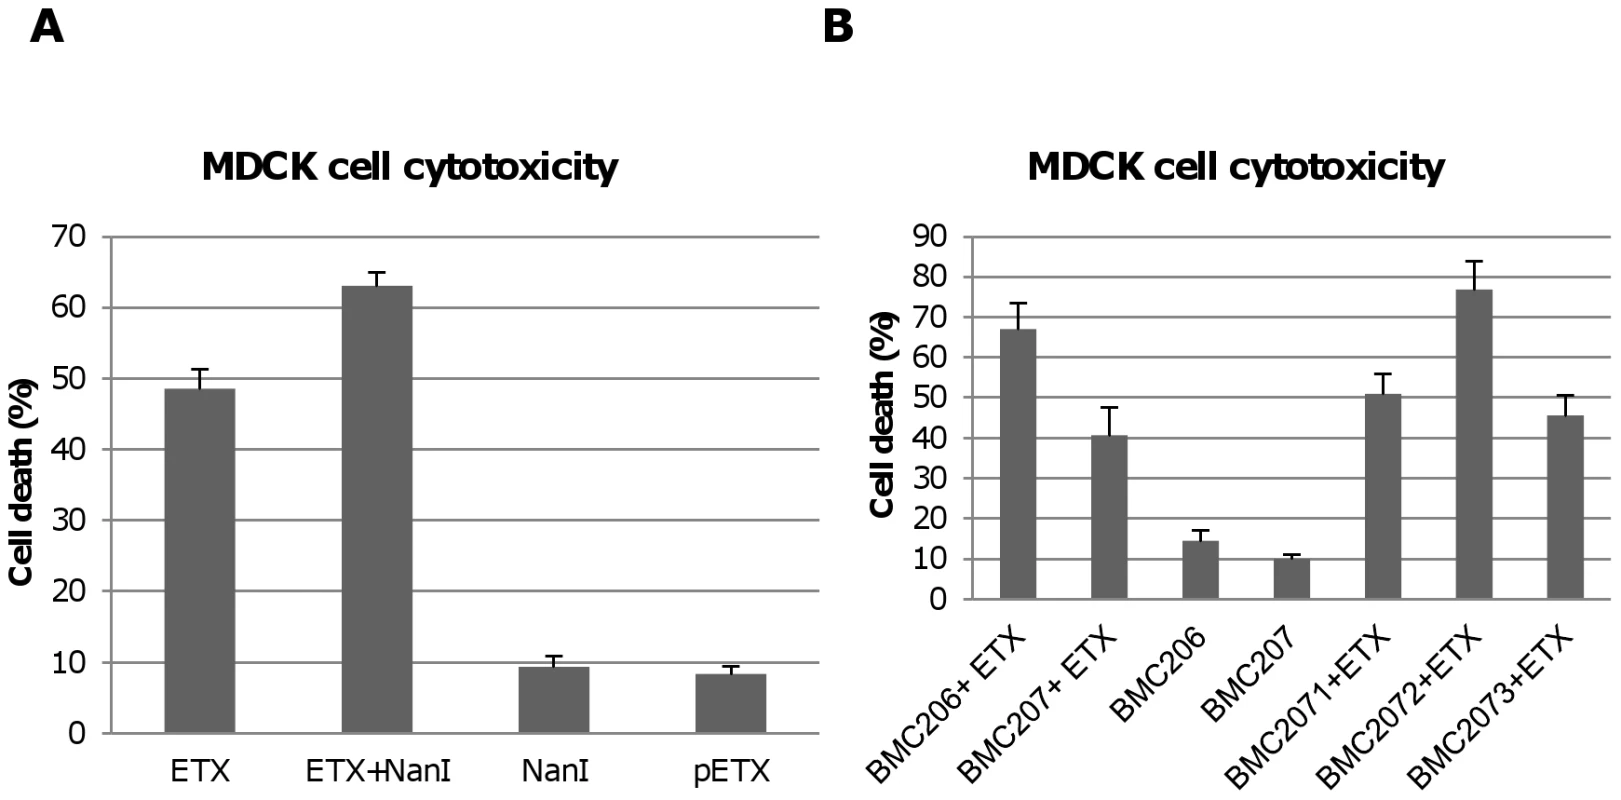 Sialidases increase cytotoxicity for MDCK cells.